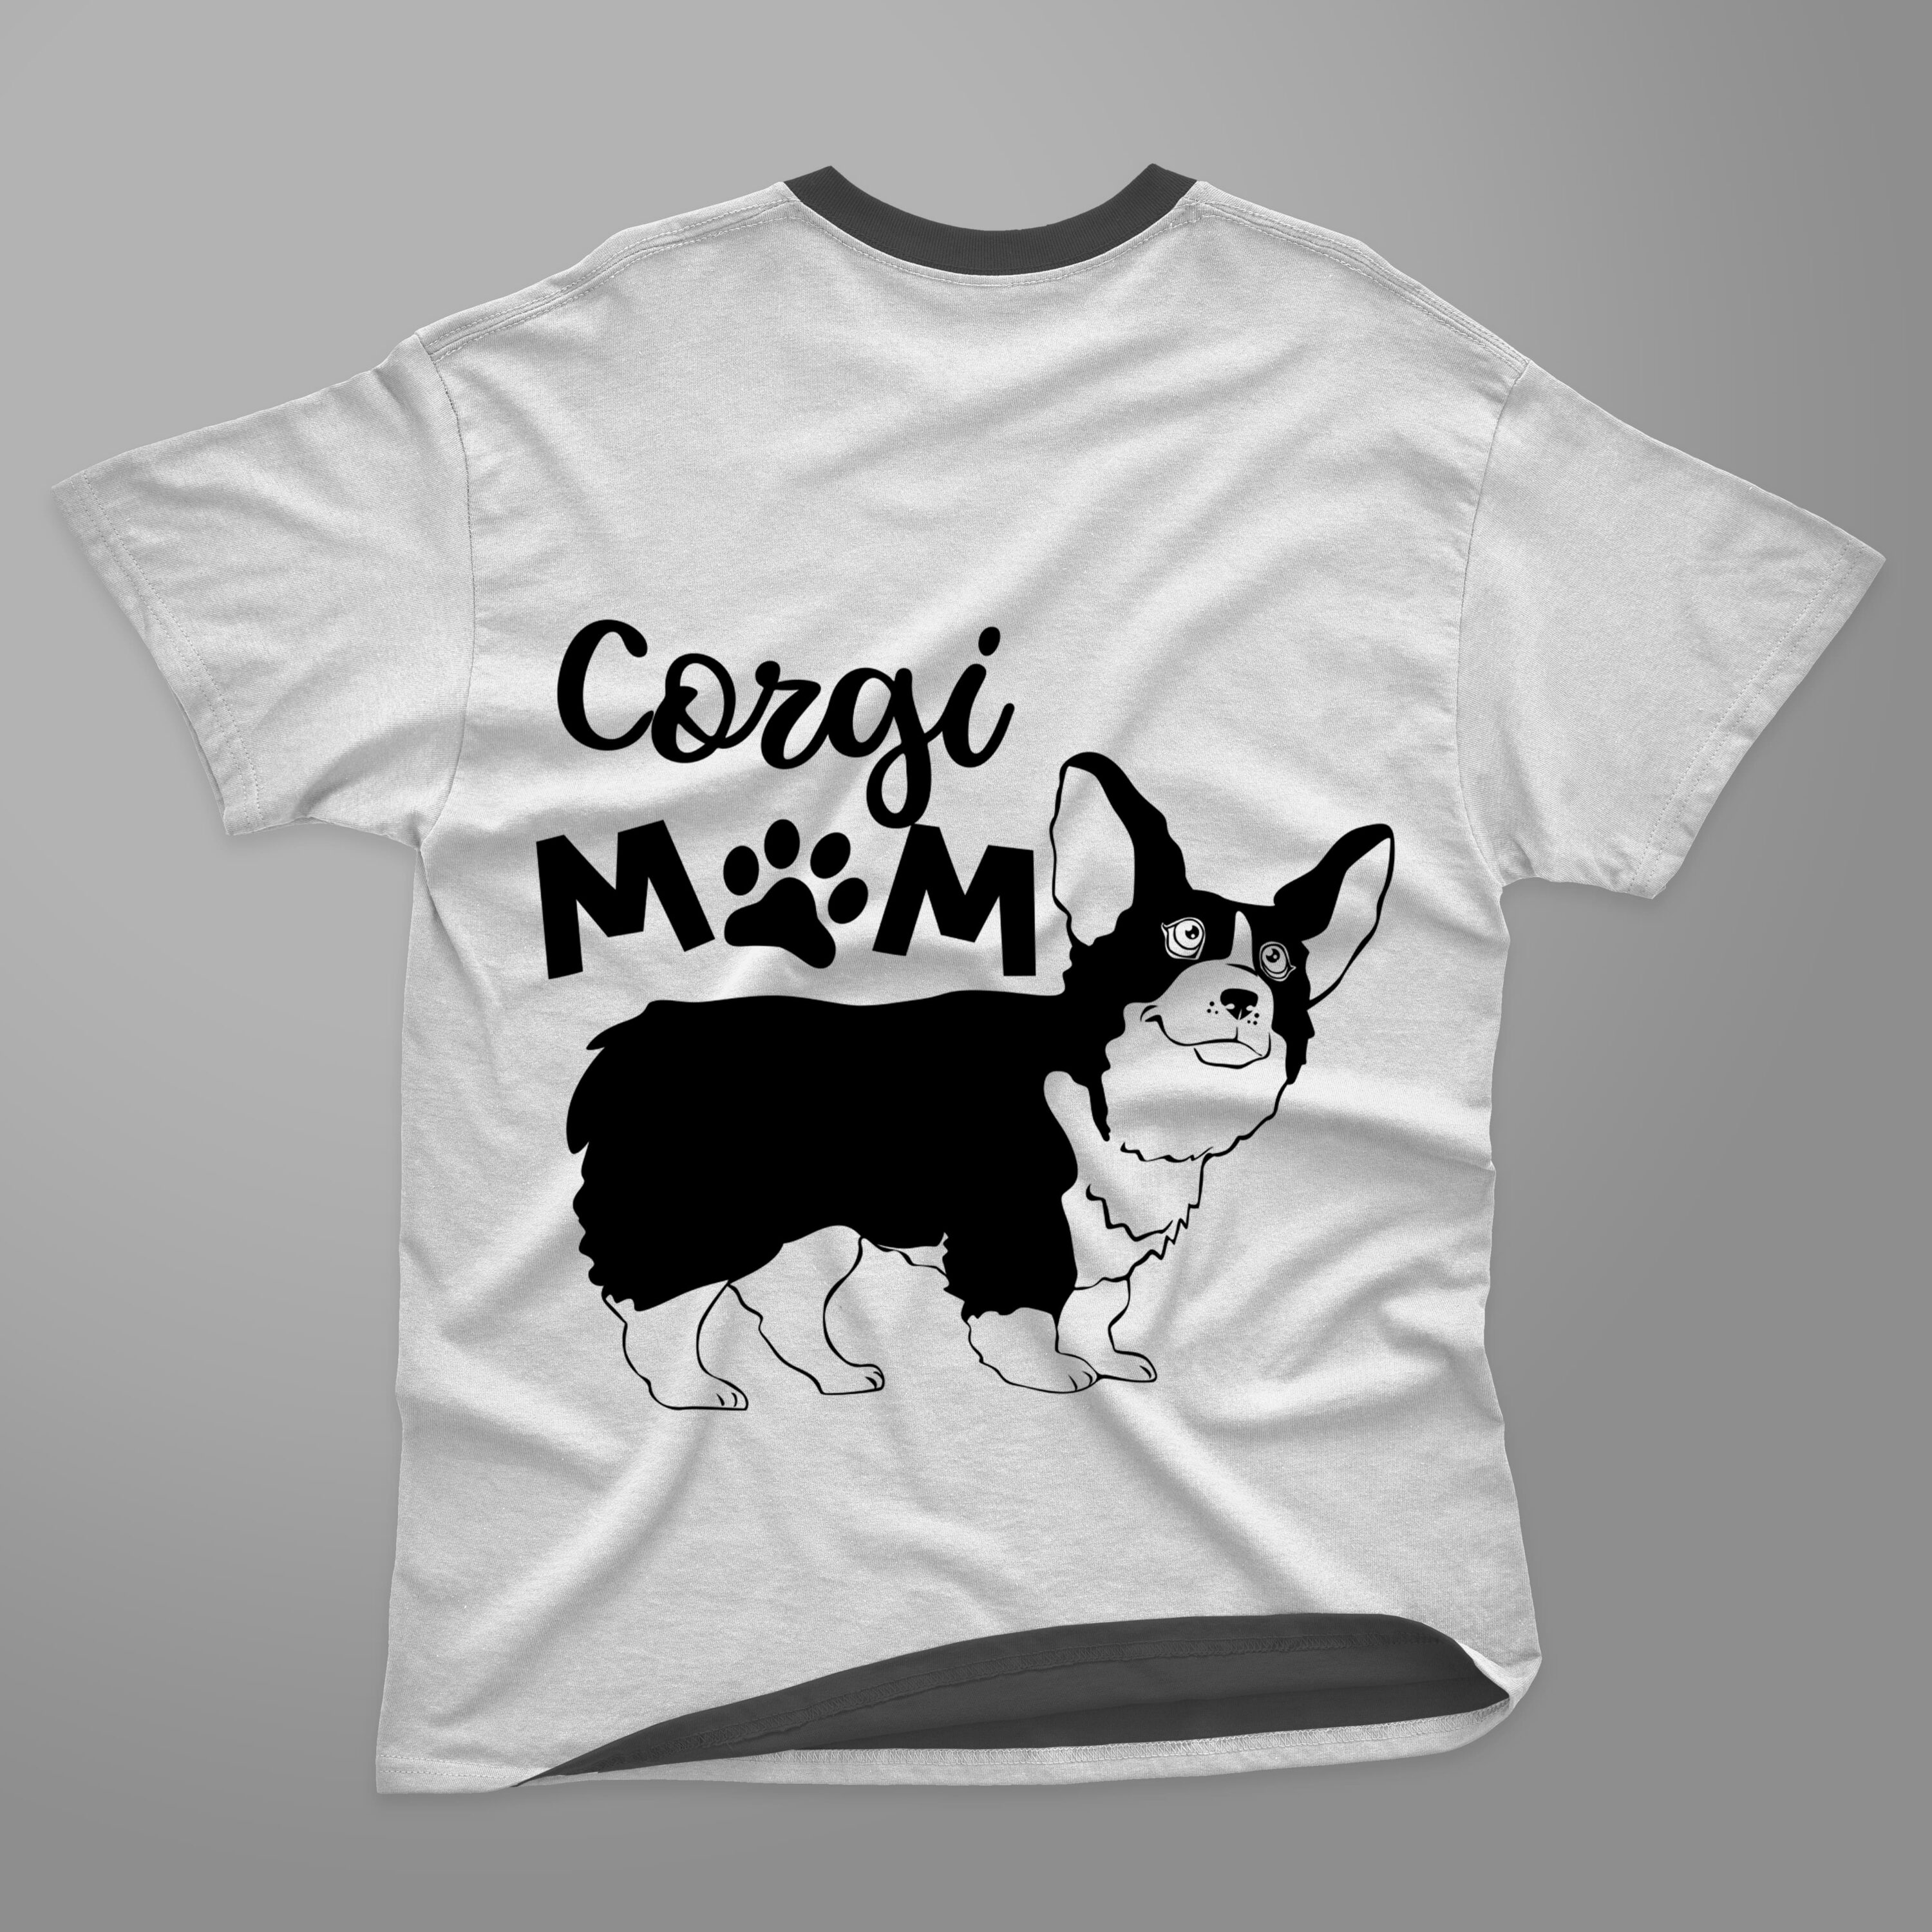 Interesting white t-shirt with the black corgi graphic and some lettering.